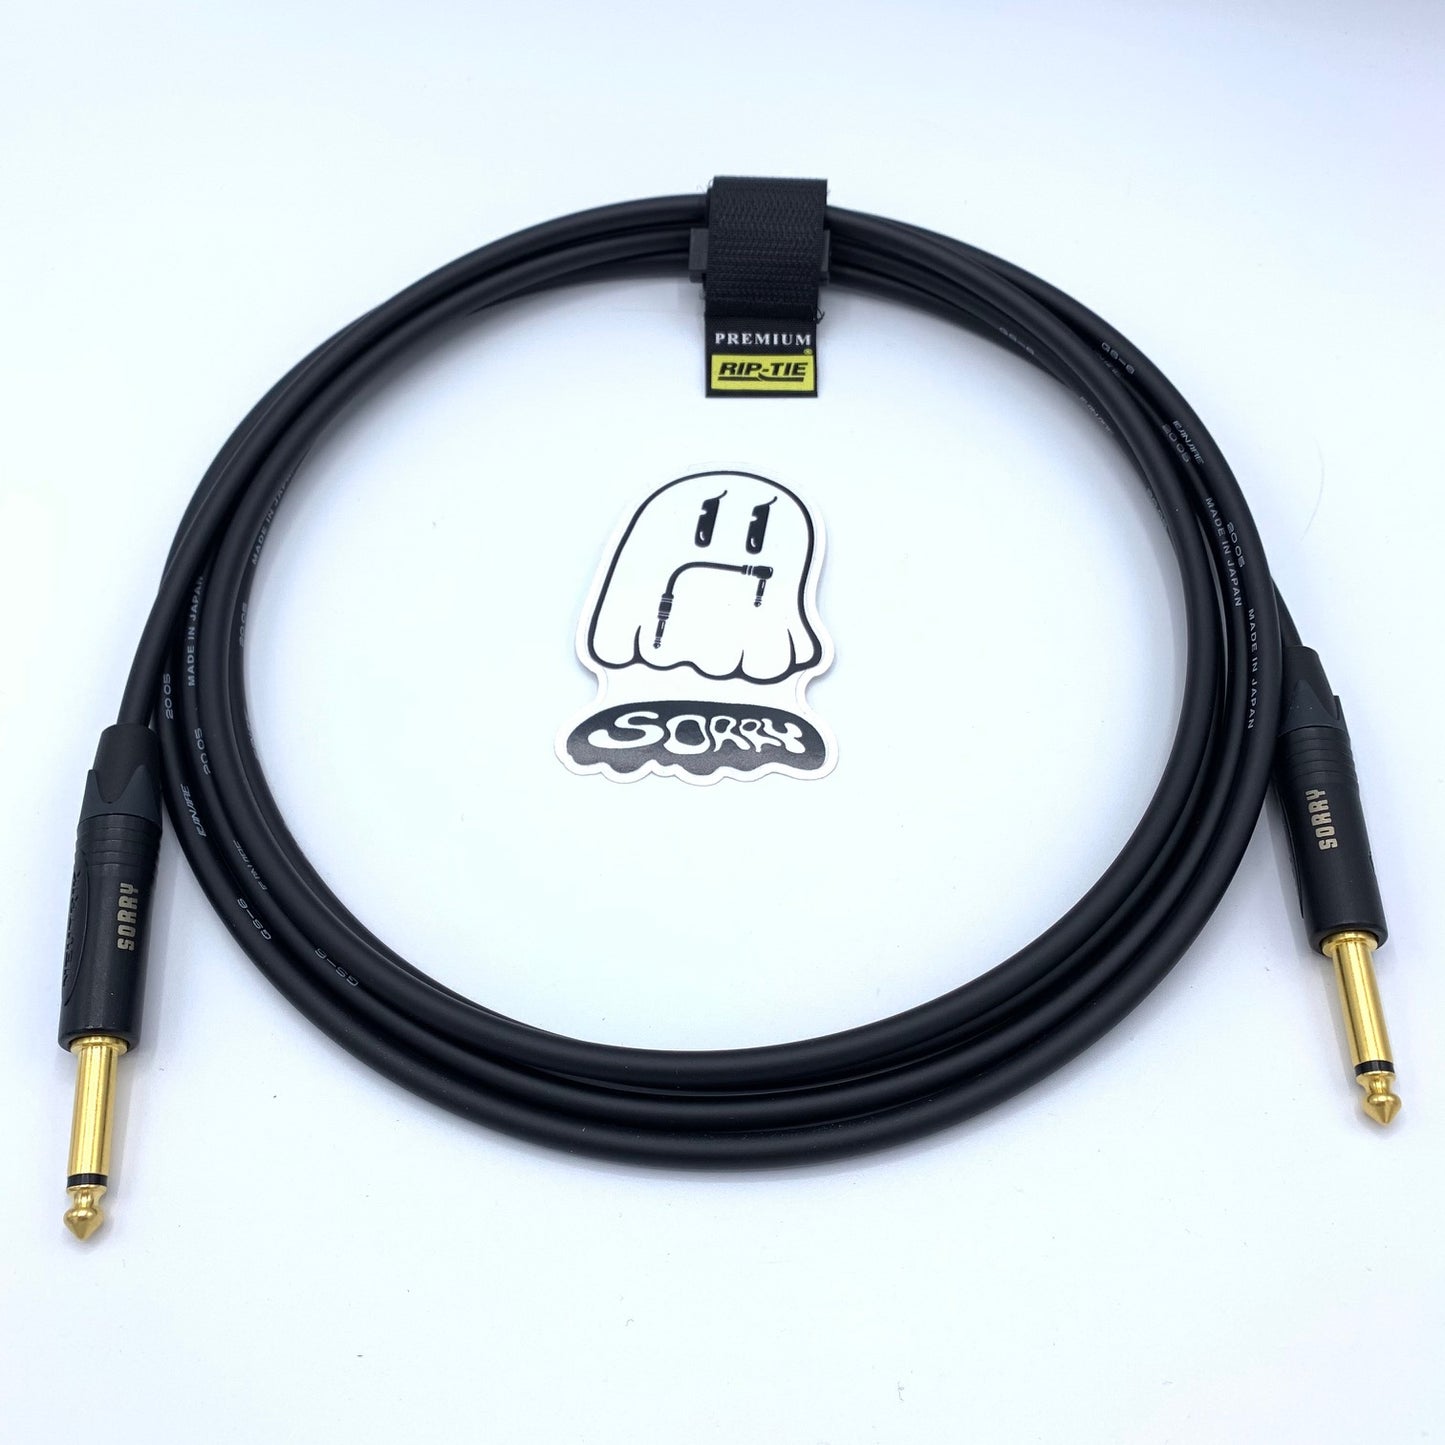 SORRY Straight to Straight Guitar / Instrument Cable - Standard Black